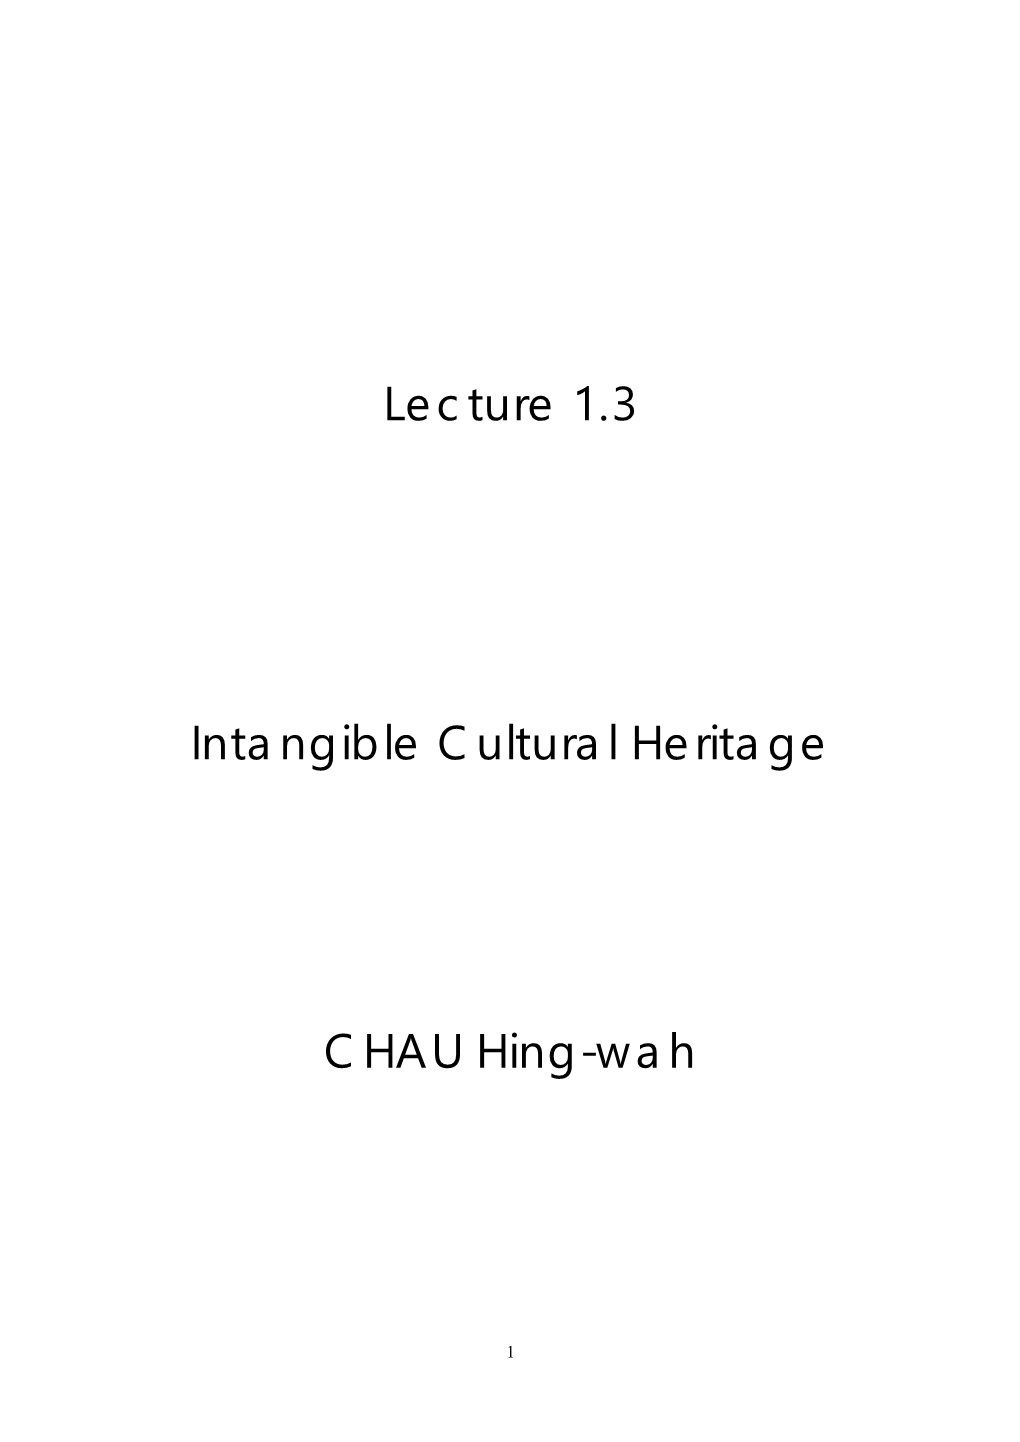 Lecture 1.3 Intangible Cultural Heritage CHAU Hing-Wah